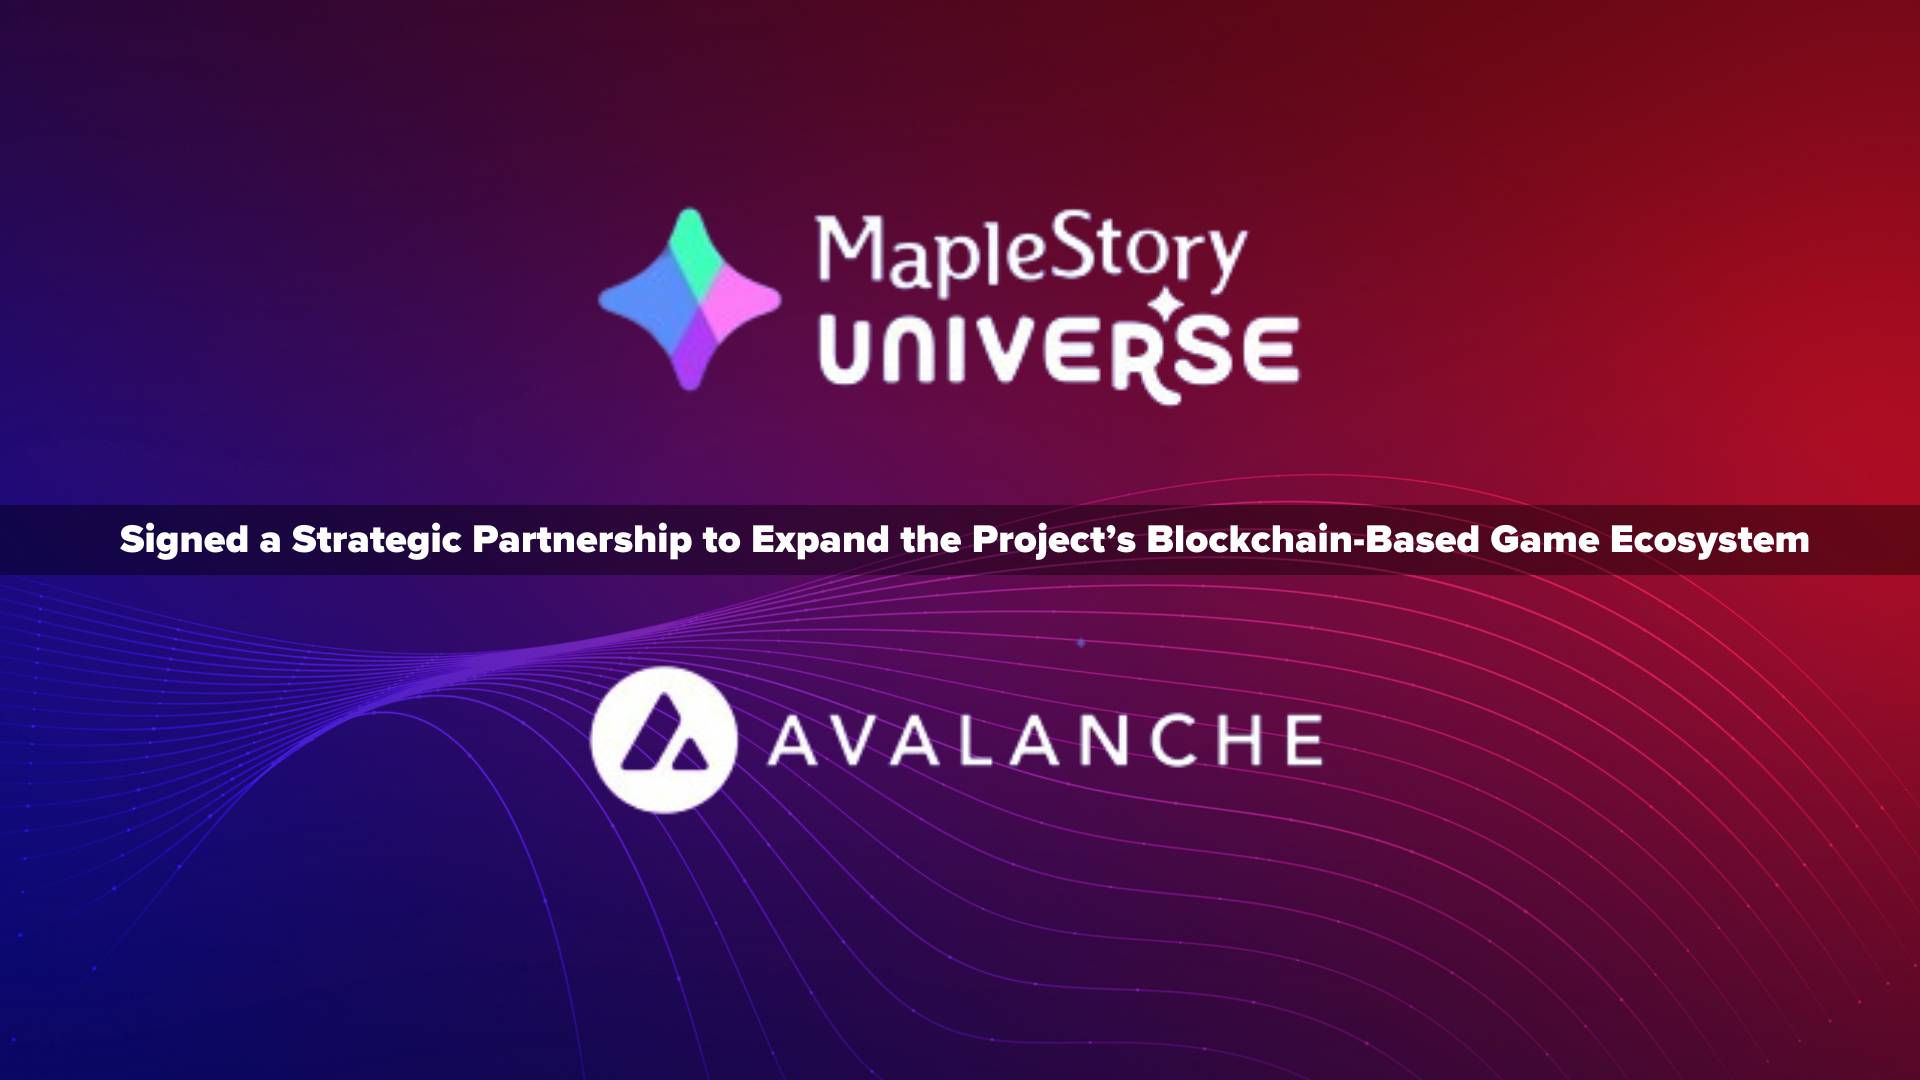 MapleStory Universe and Avalanche signed a strategic partnership to expand the project's blockchain-based game ecosystem